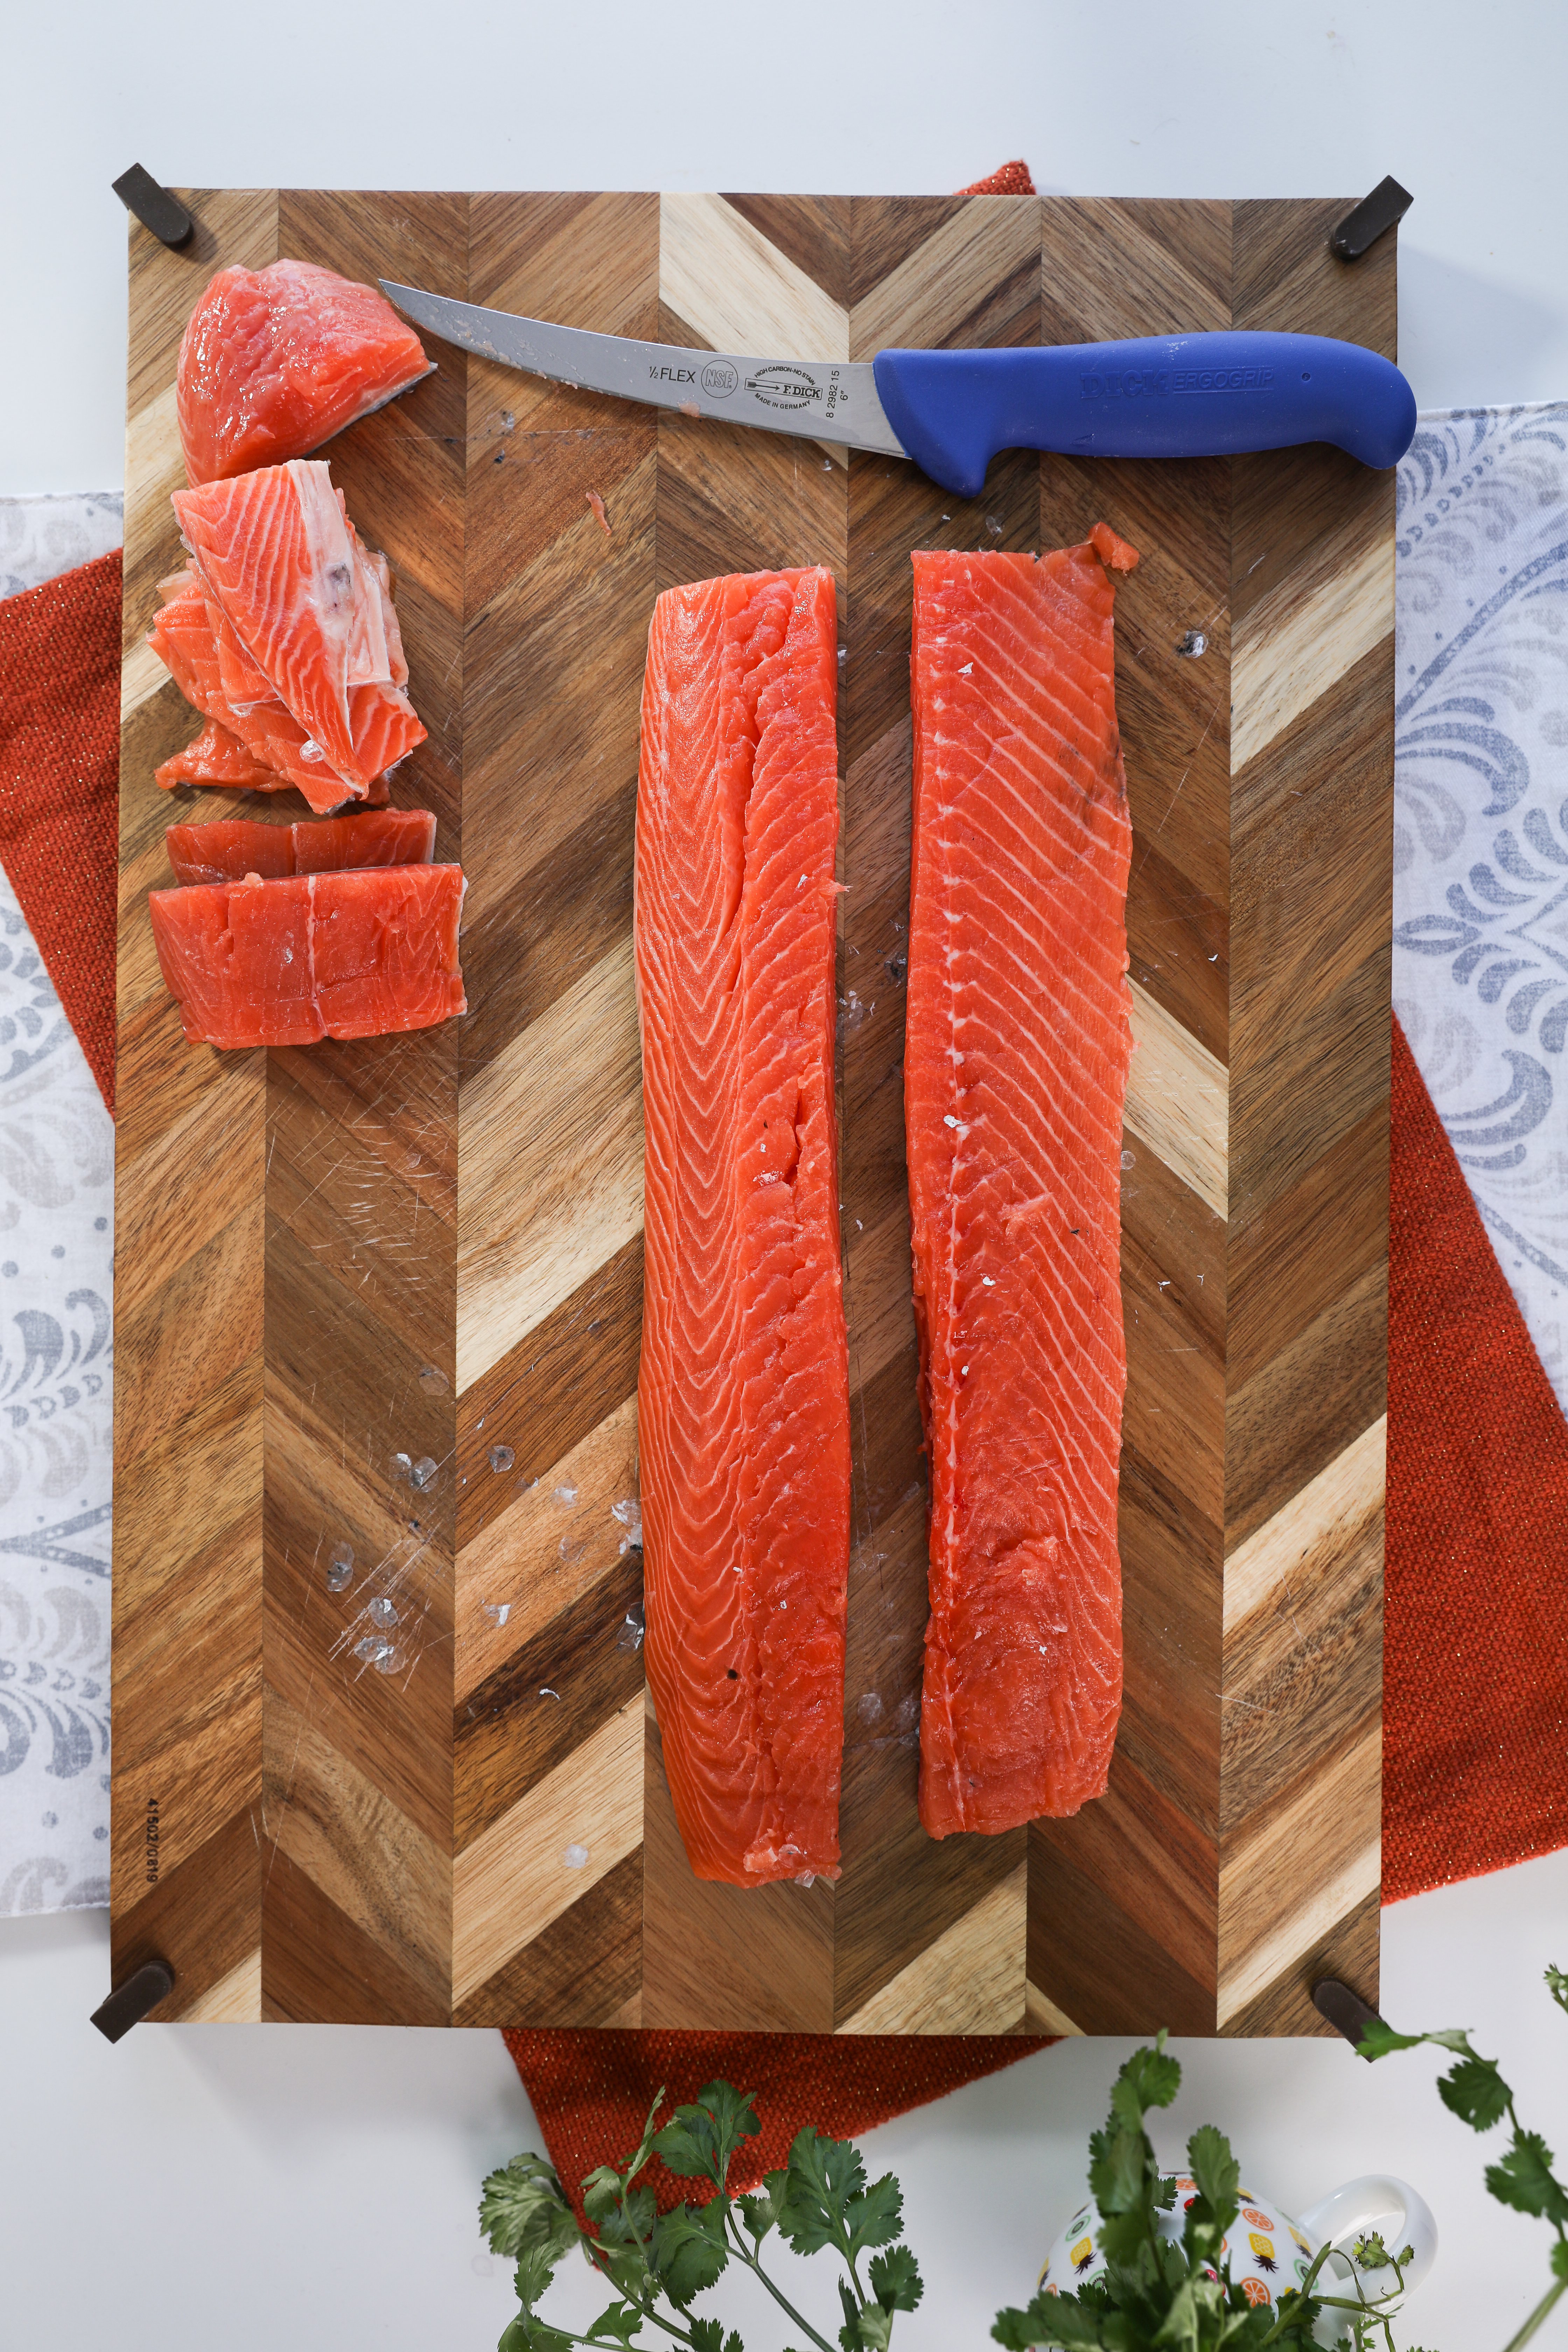 Fresh salmon fillet sliced into two strips, neatly presented on a wooden board alongside a knife.